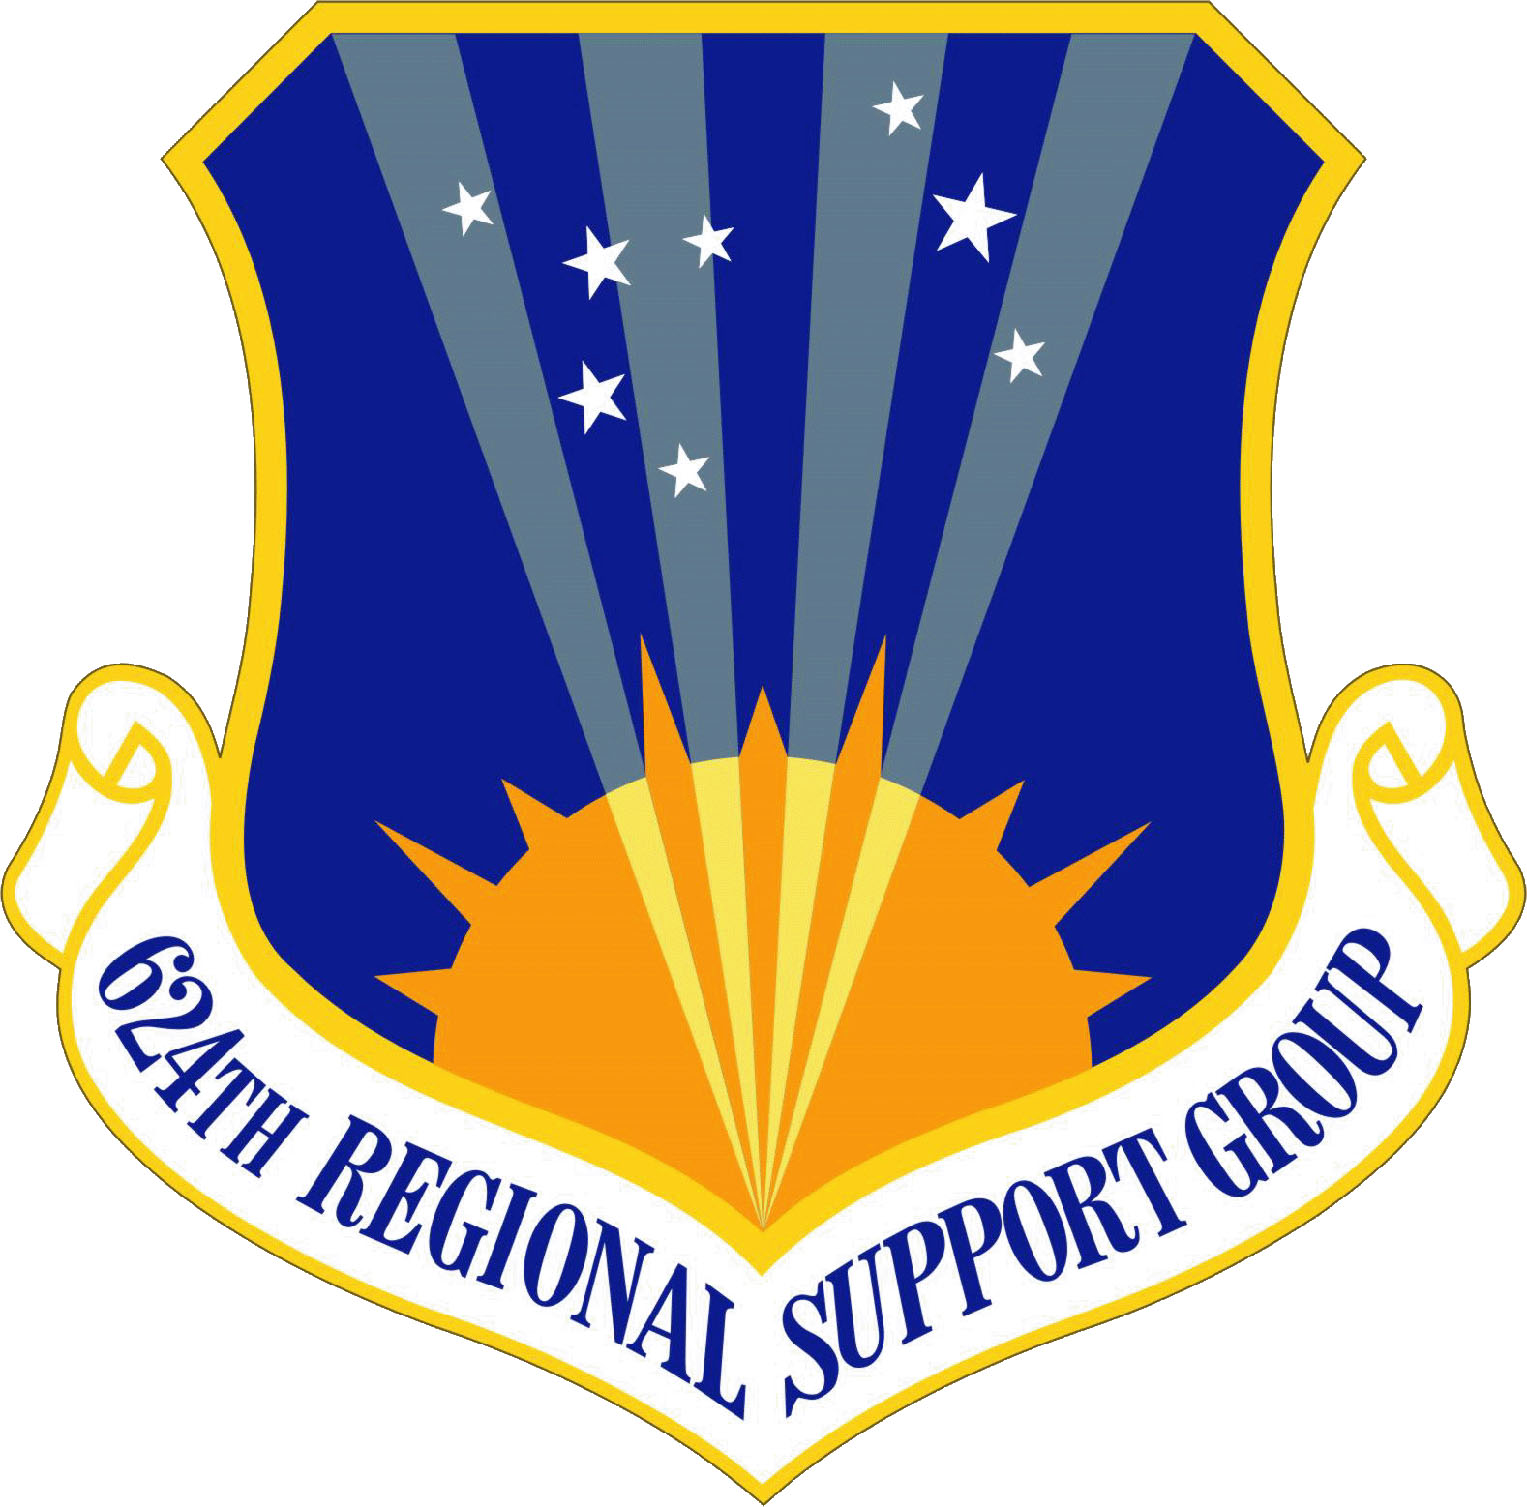 624th Regional Support Group